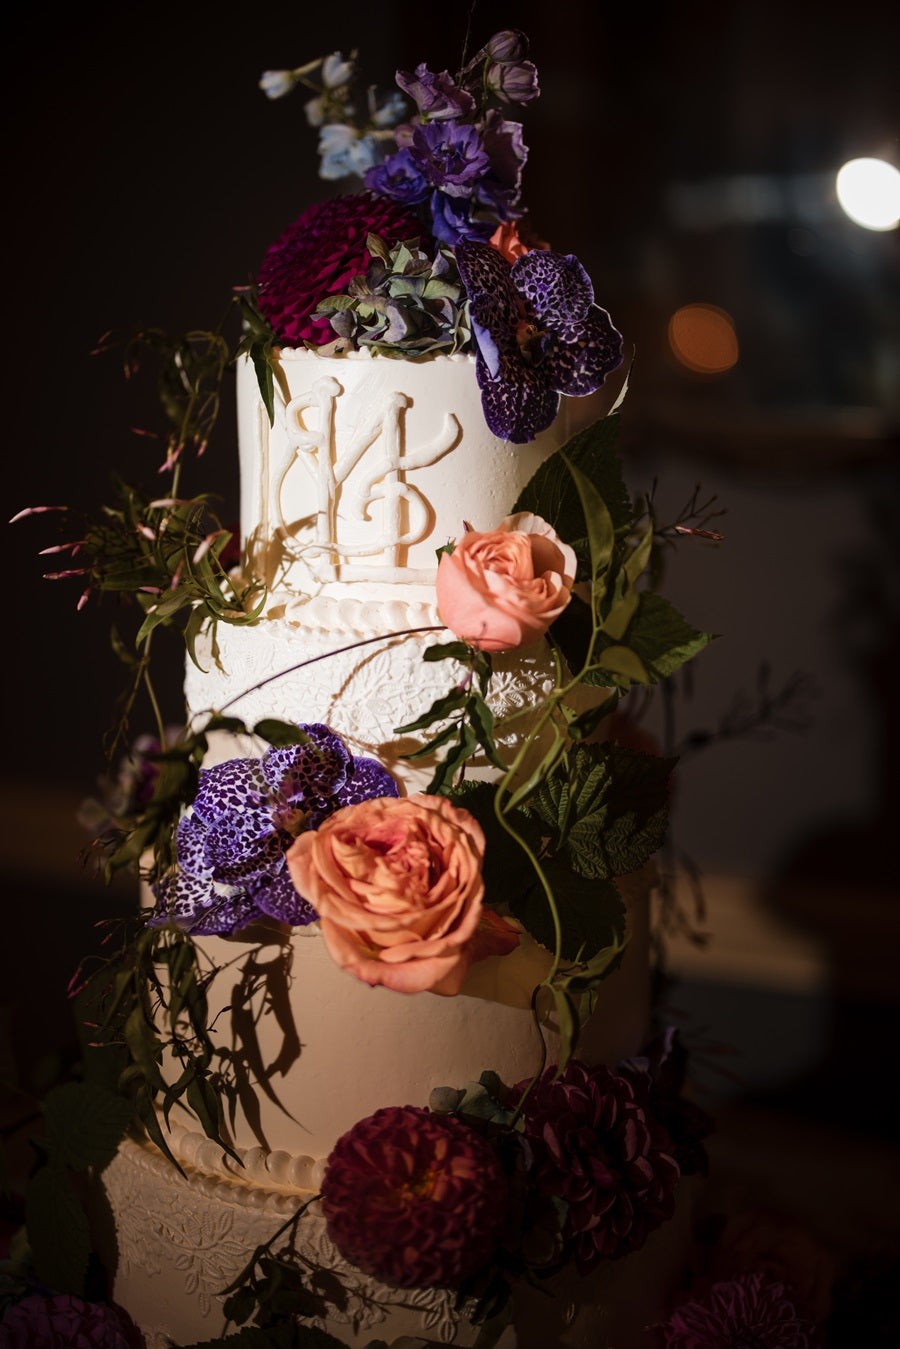 The cake is white with floral texture and fresh floral/greenery climbing up the sides.